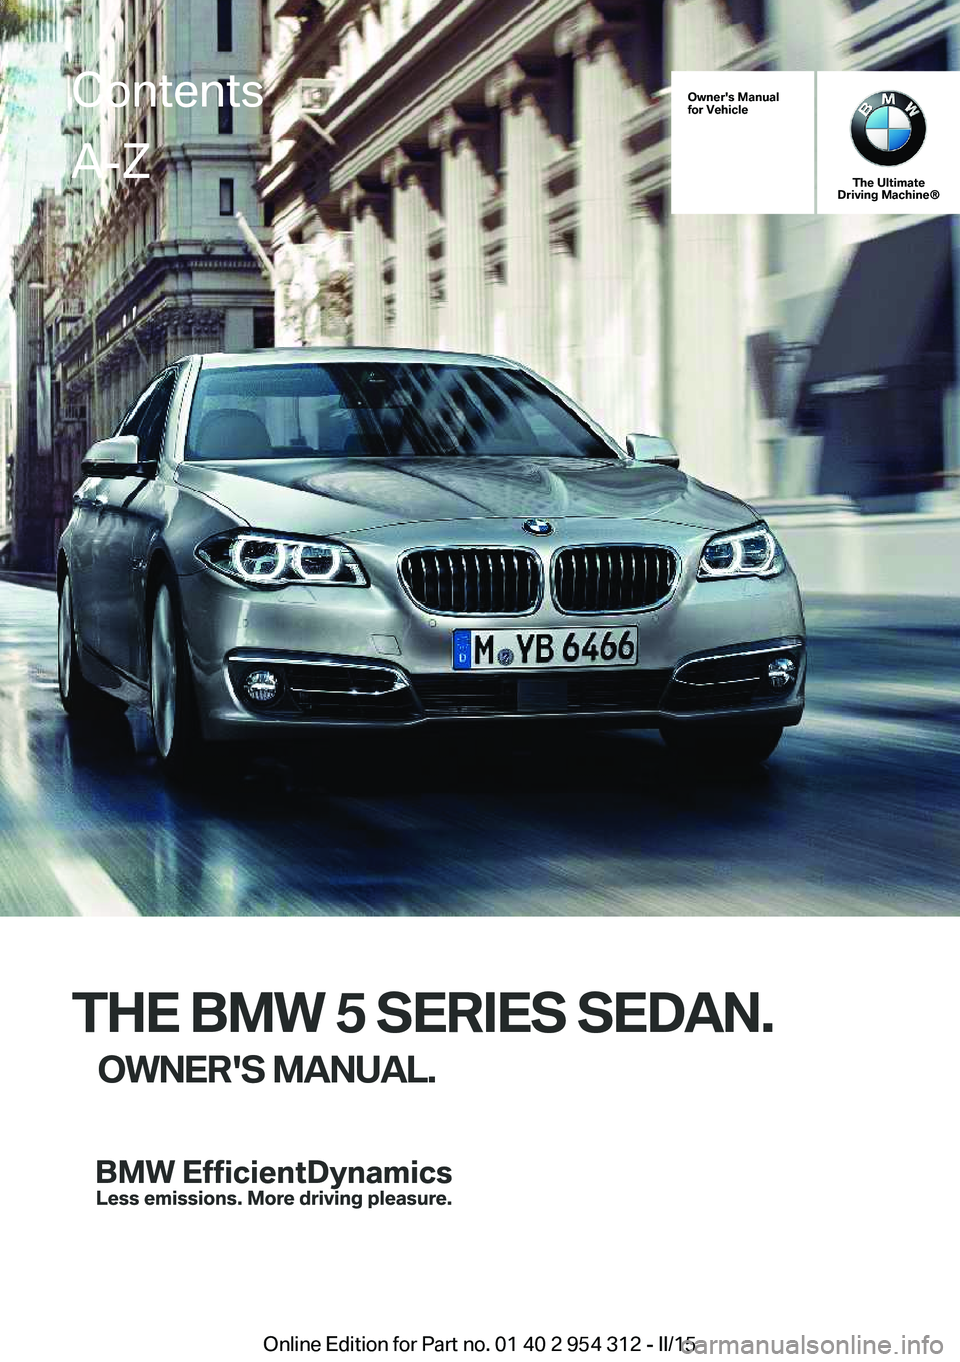 BMW 528I SEDAN 2016  Owners Manual Owner's Manual
for Vehicle
The Ultimate
Driving Machine®
THE BMW 5 SERIES SEDAN.
OWNER'S MANUAL.
ContentsA-Z
Online Edition for Part no. 01 40 2 954 312 - II/15   